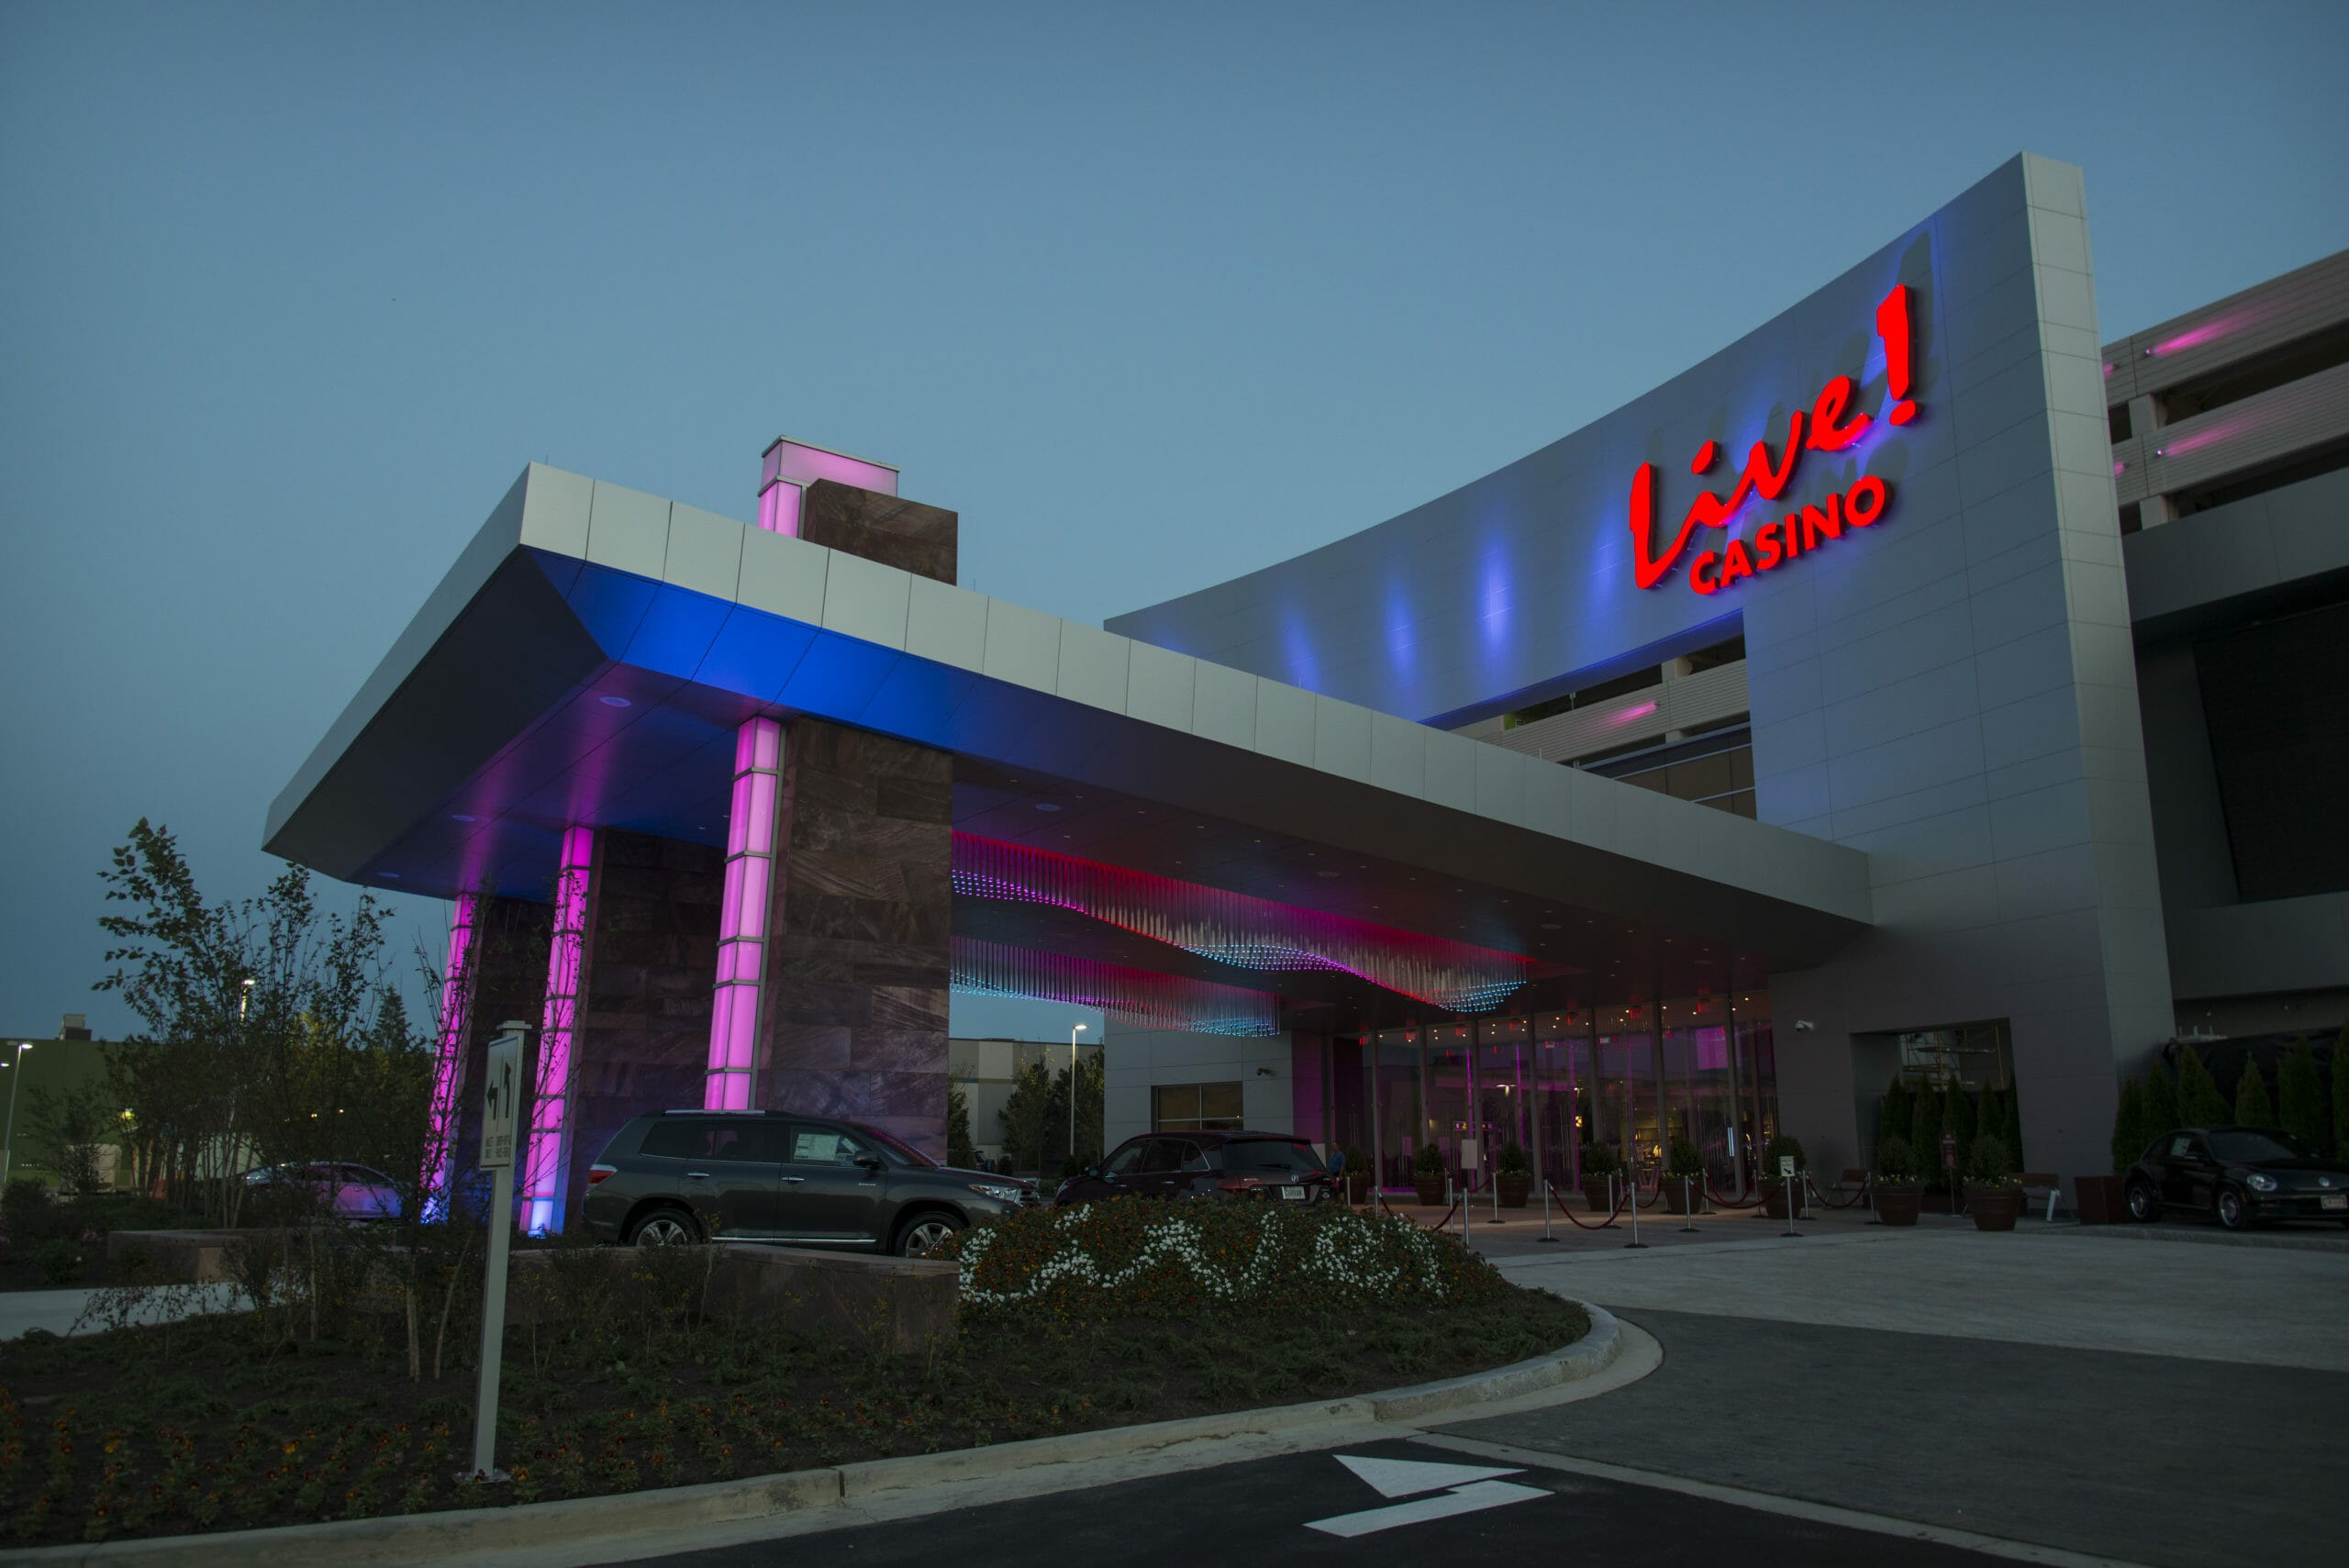 live casino and hotel maryland